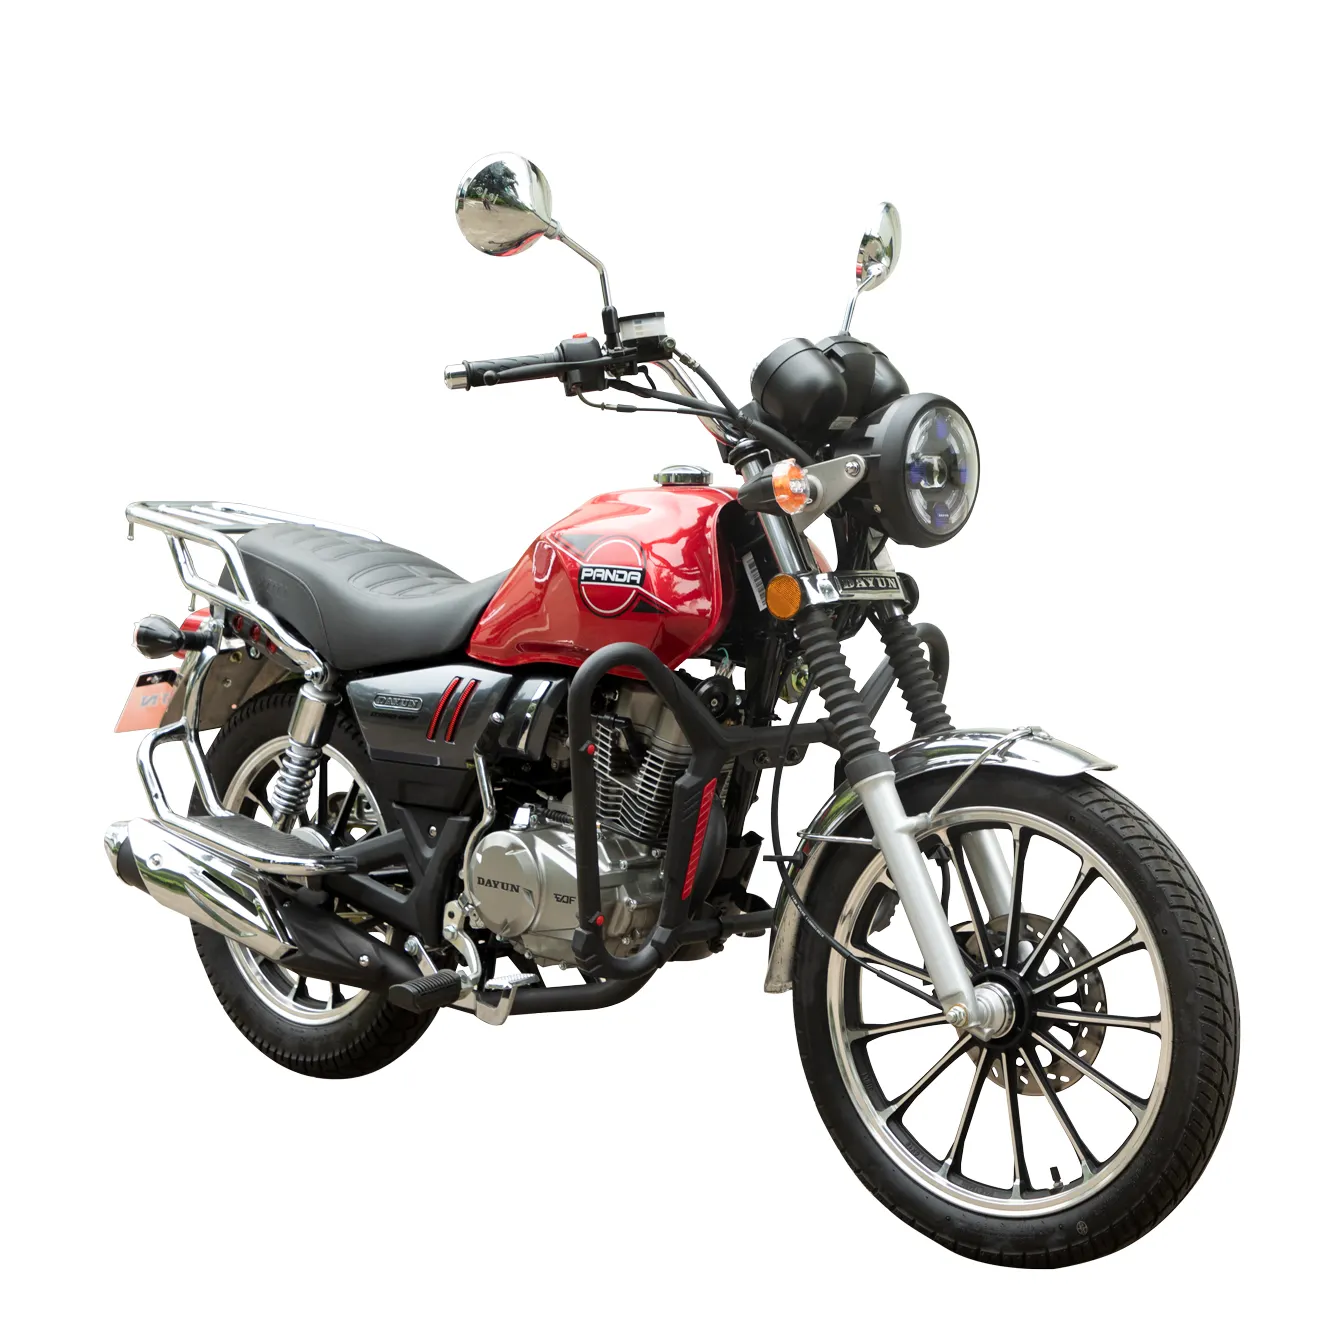 2021 DAYUN Newest 150cc Off-road Motorcycles dy150-6e racing in high speed moto